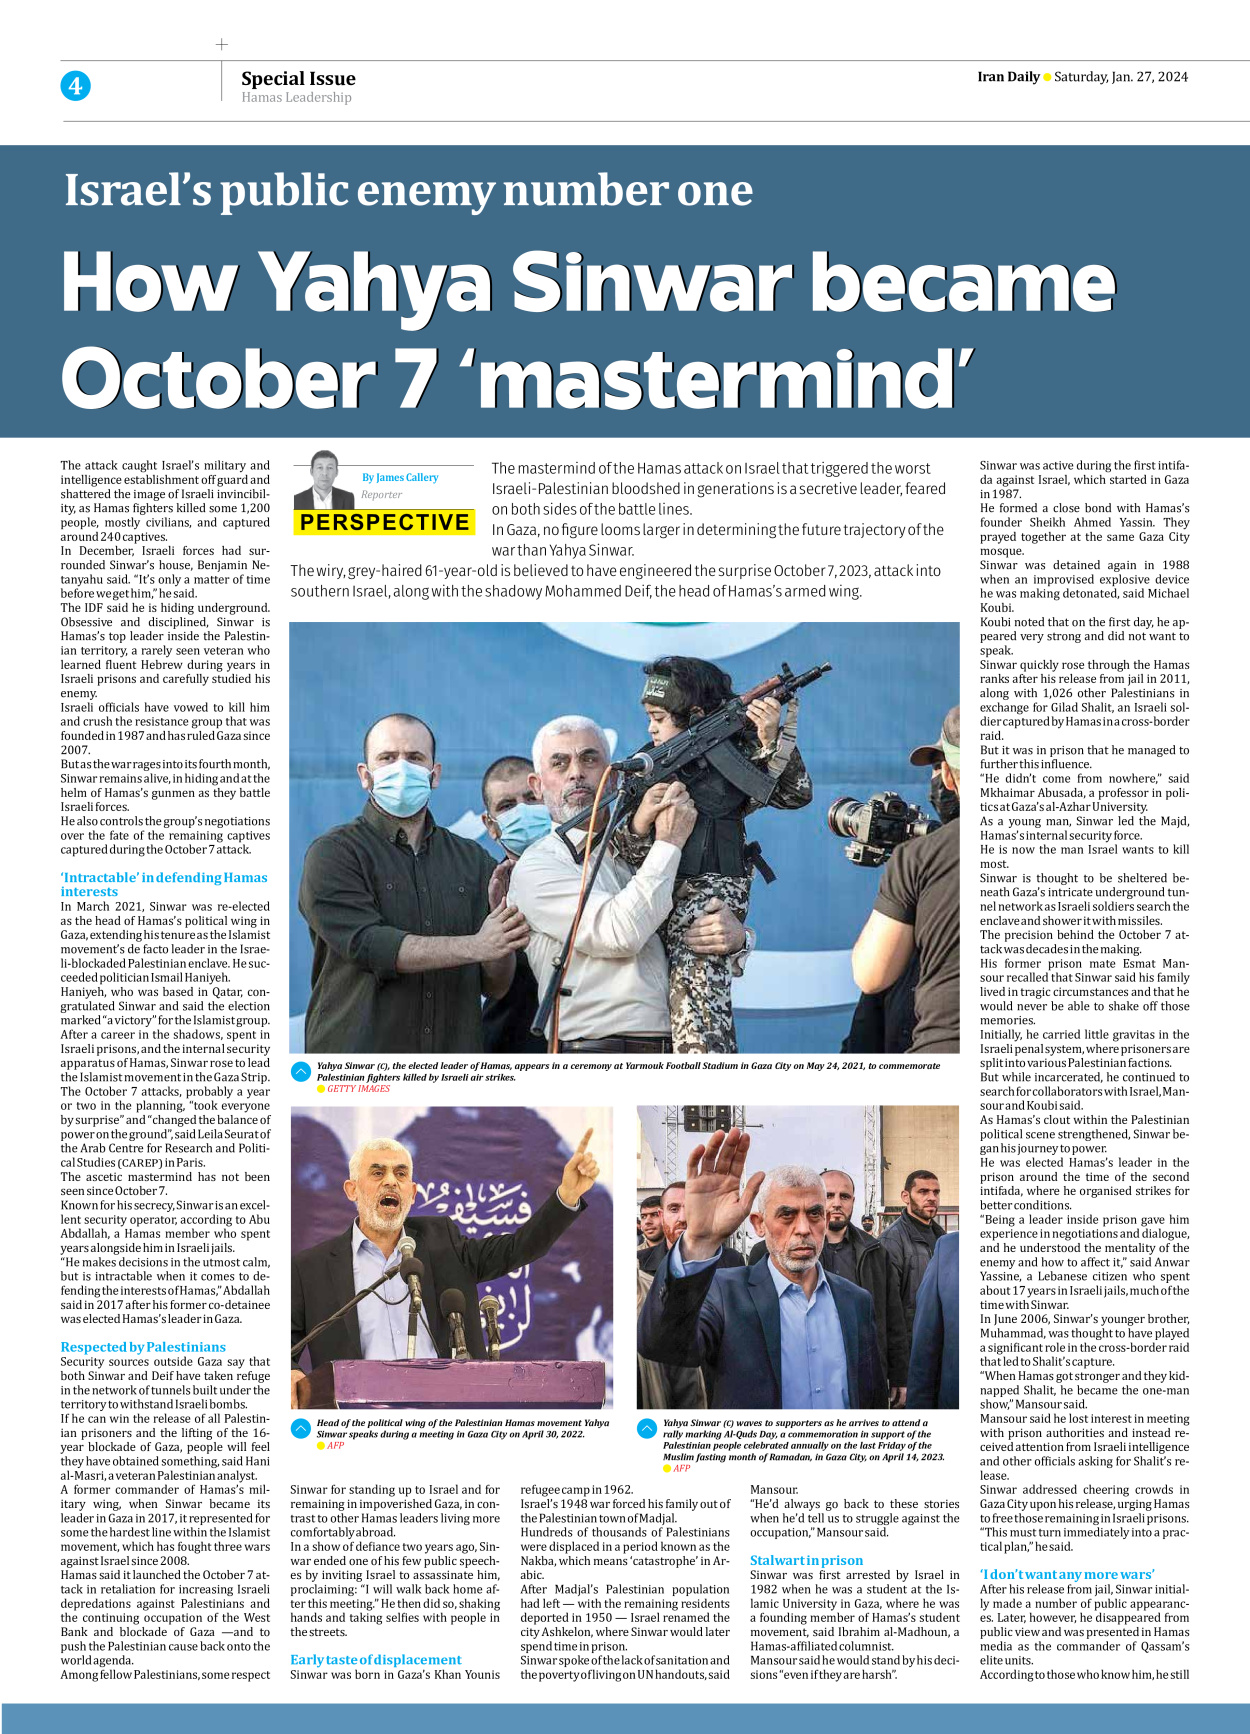 Iran Daily - Number Seven Thousand Four Hundred and Ninety Four - 27 January 2024 - Page 4